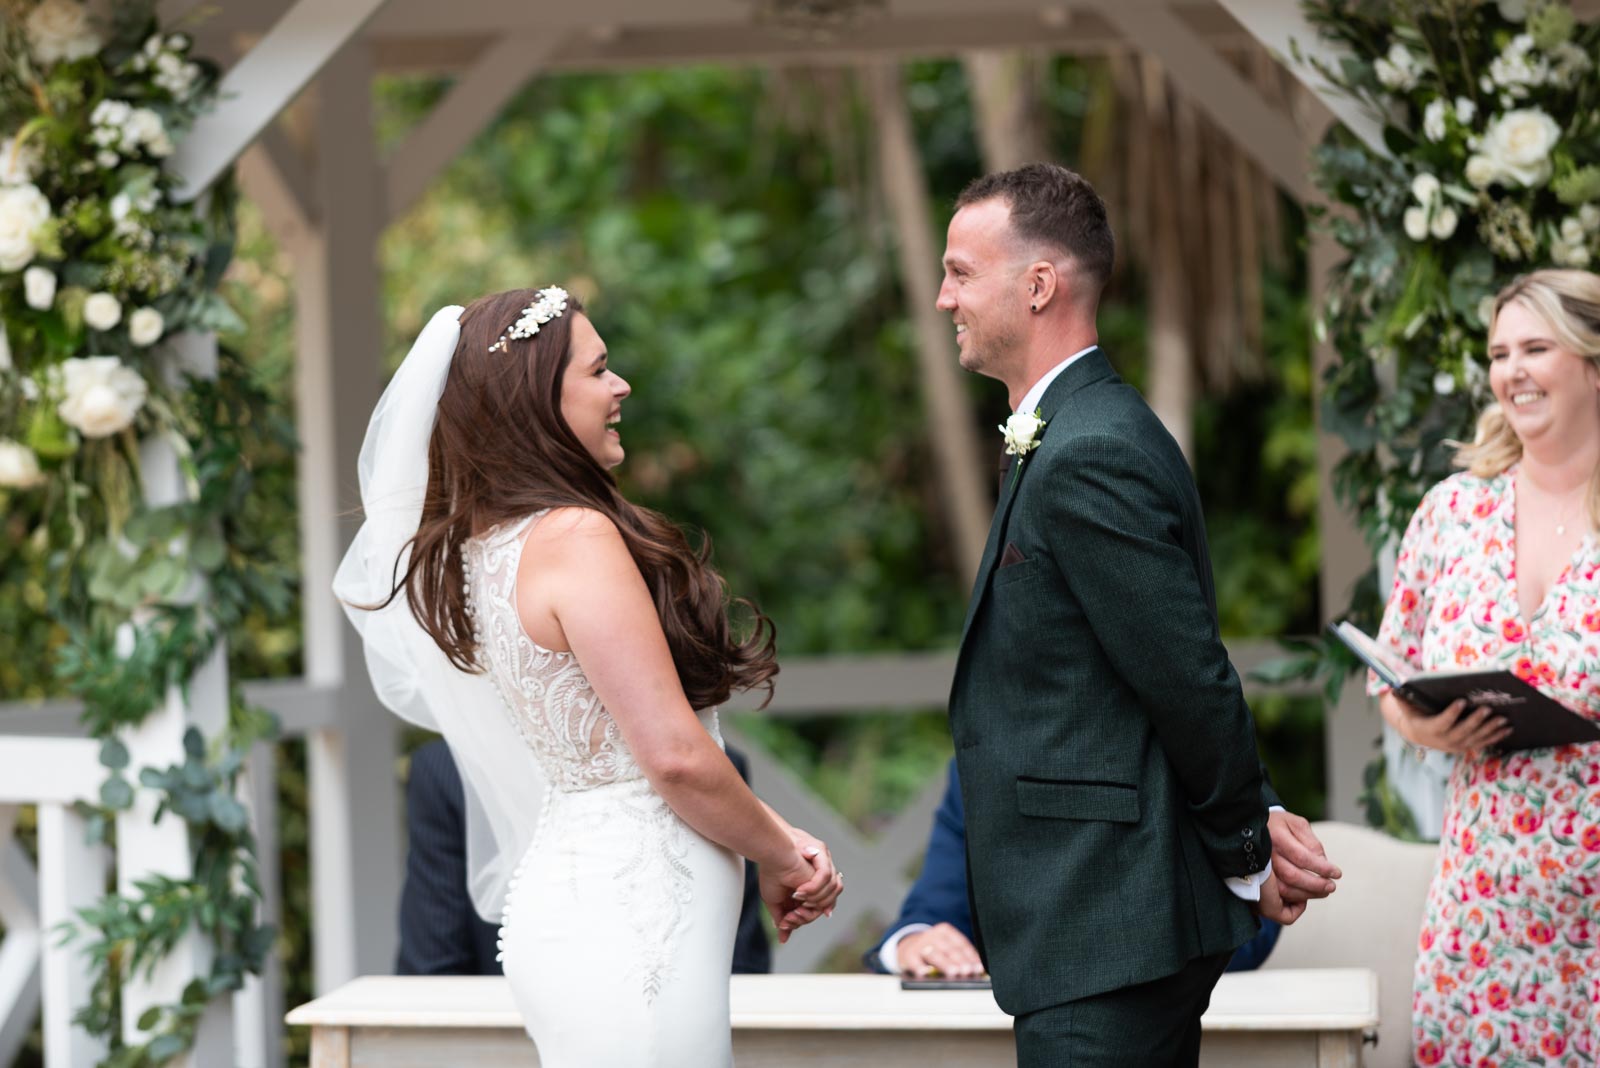 Natalie and Dean enjoy a funny moment during their wedding at the Gazebo in the garden at Pelham House Hotel, Lewes.